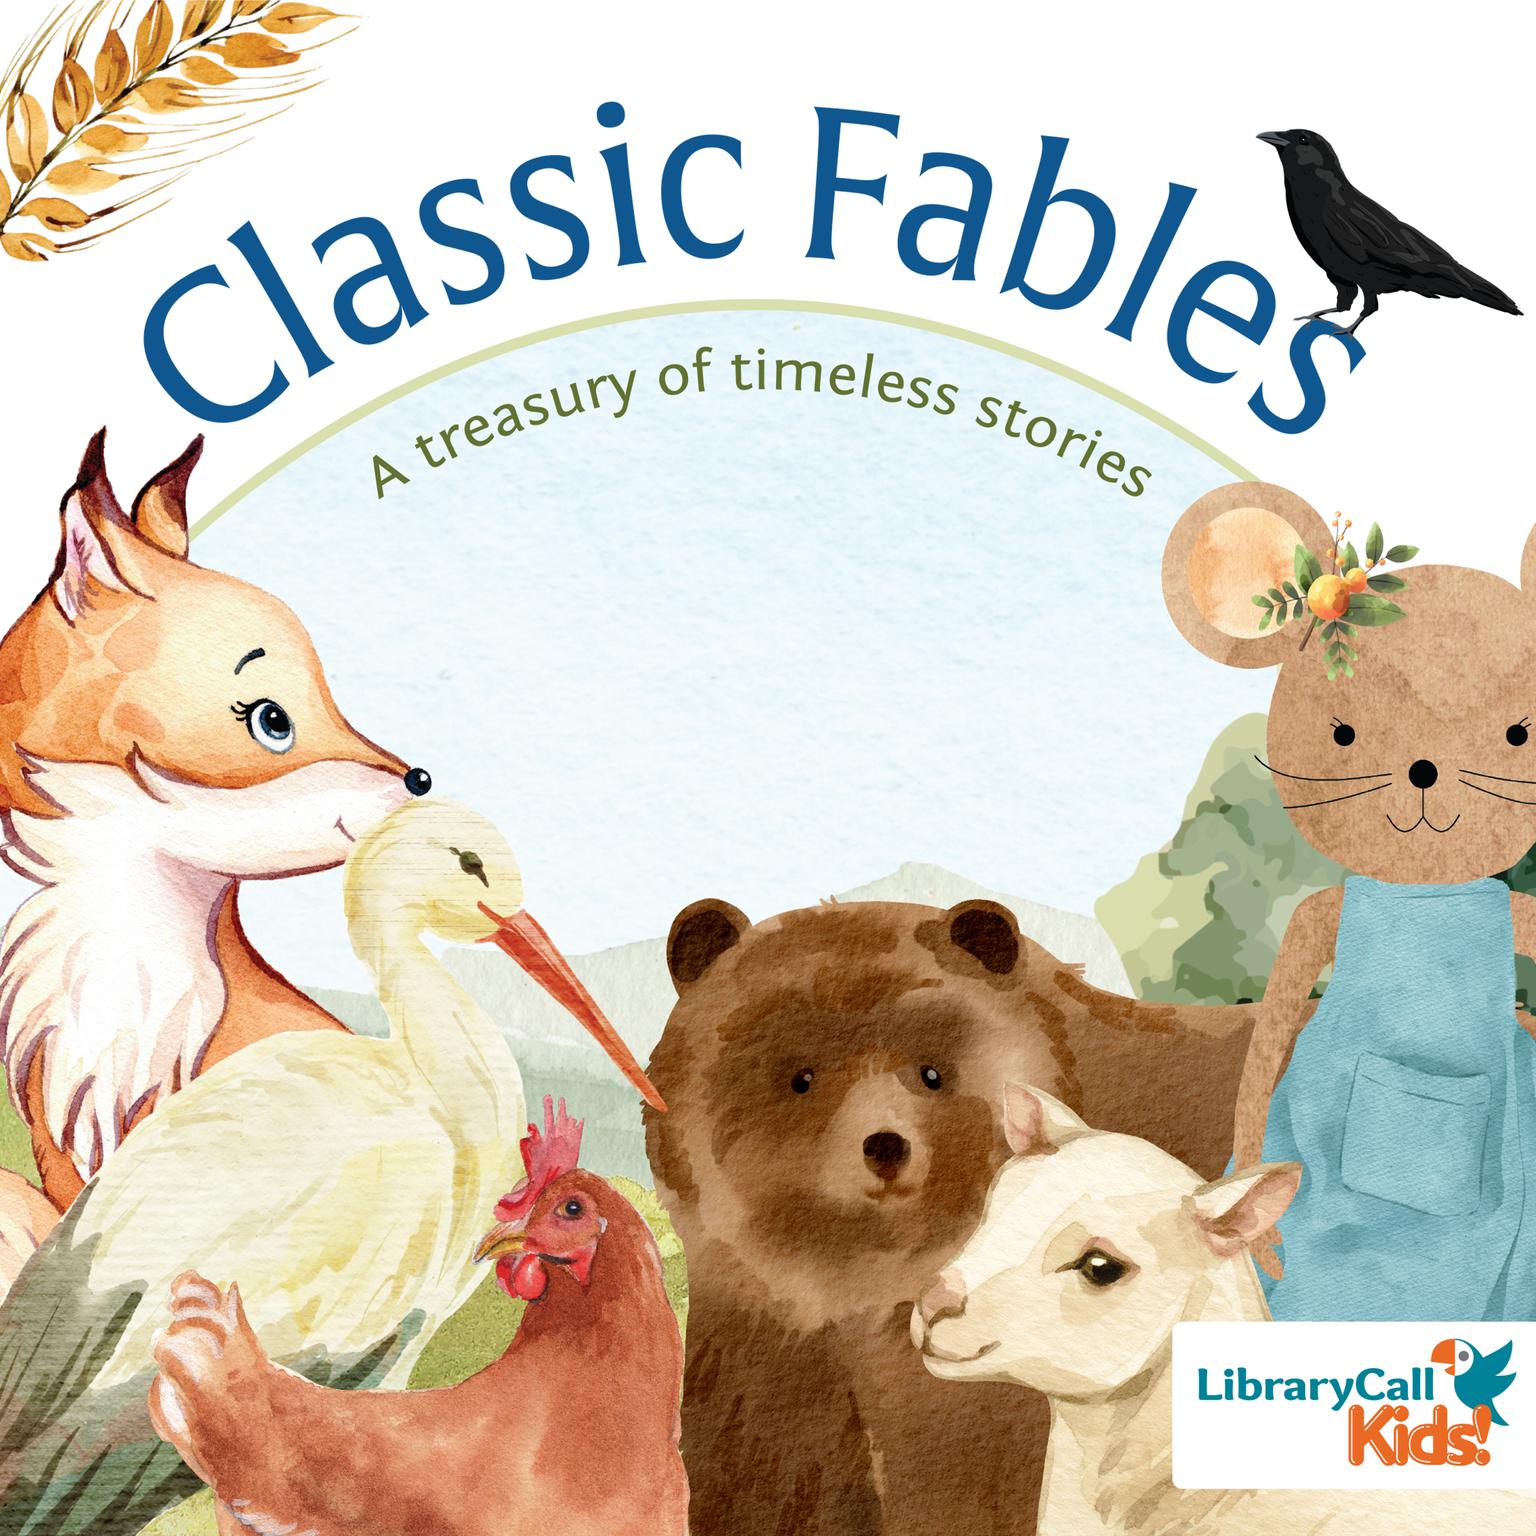 Classic Fables Audiobook, by Aesop